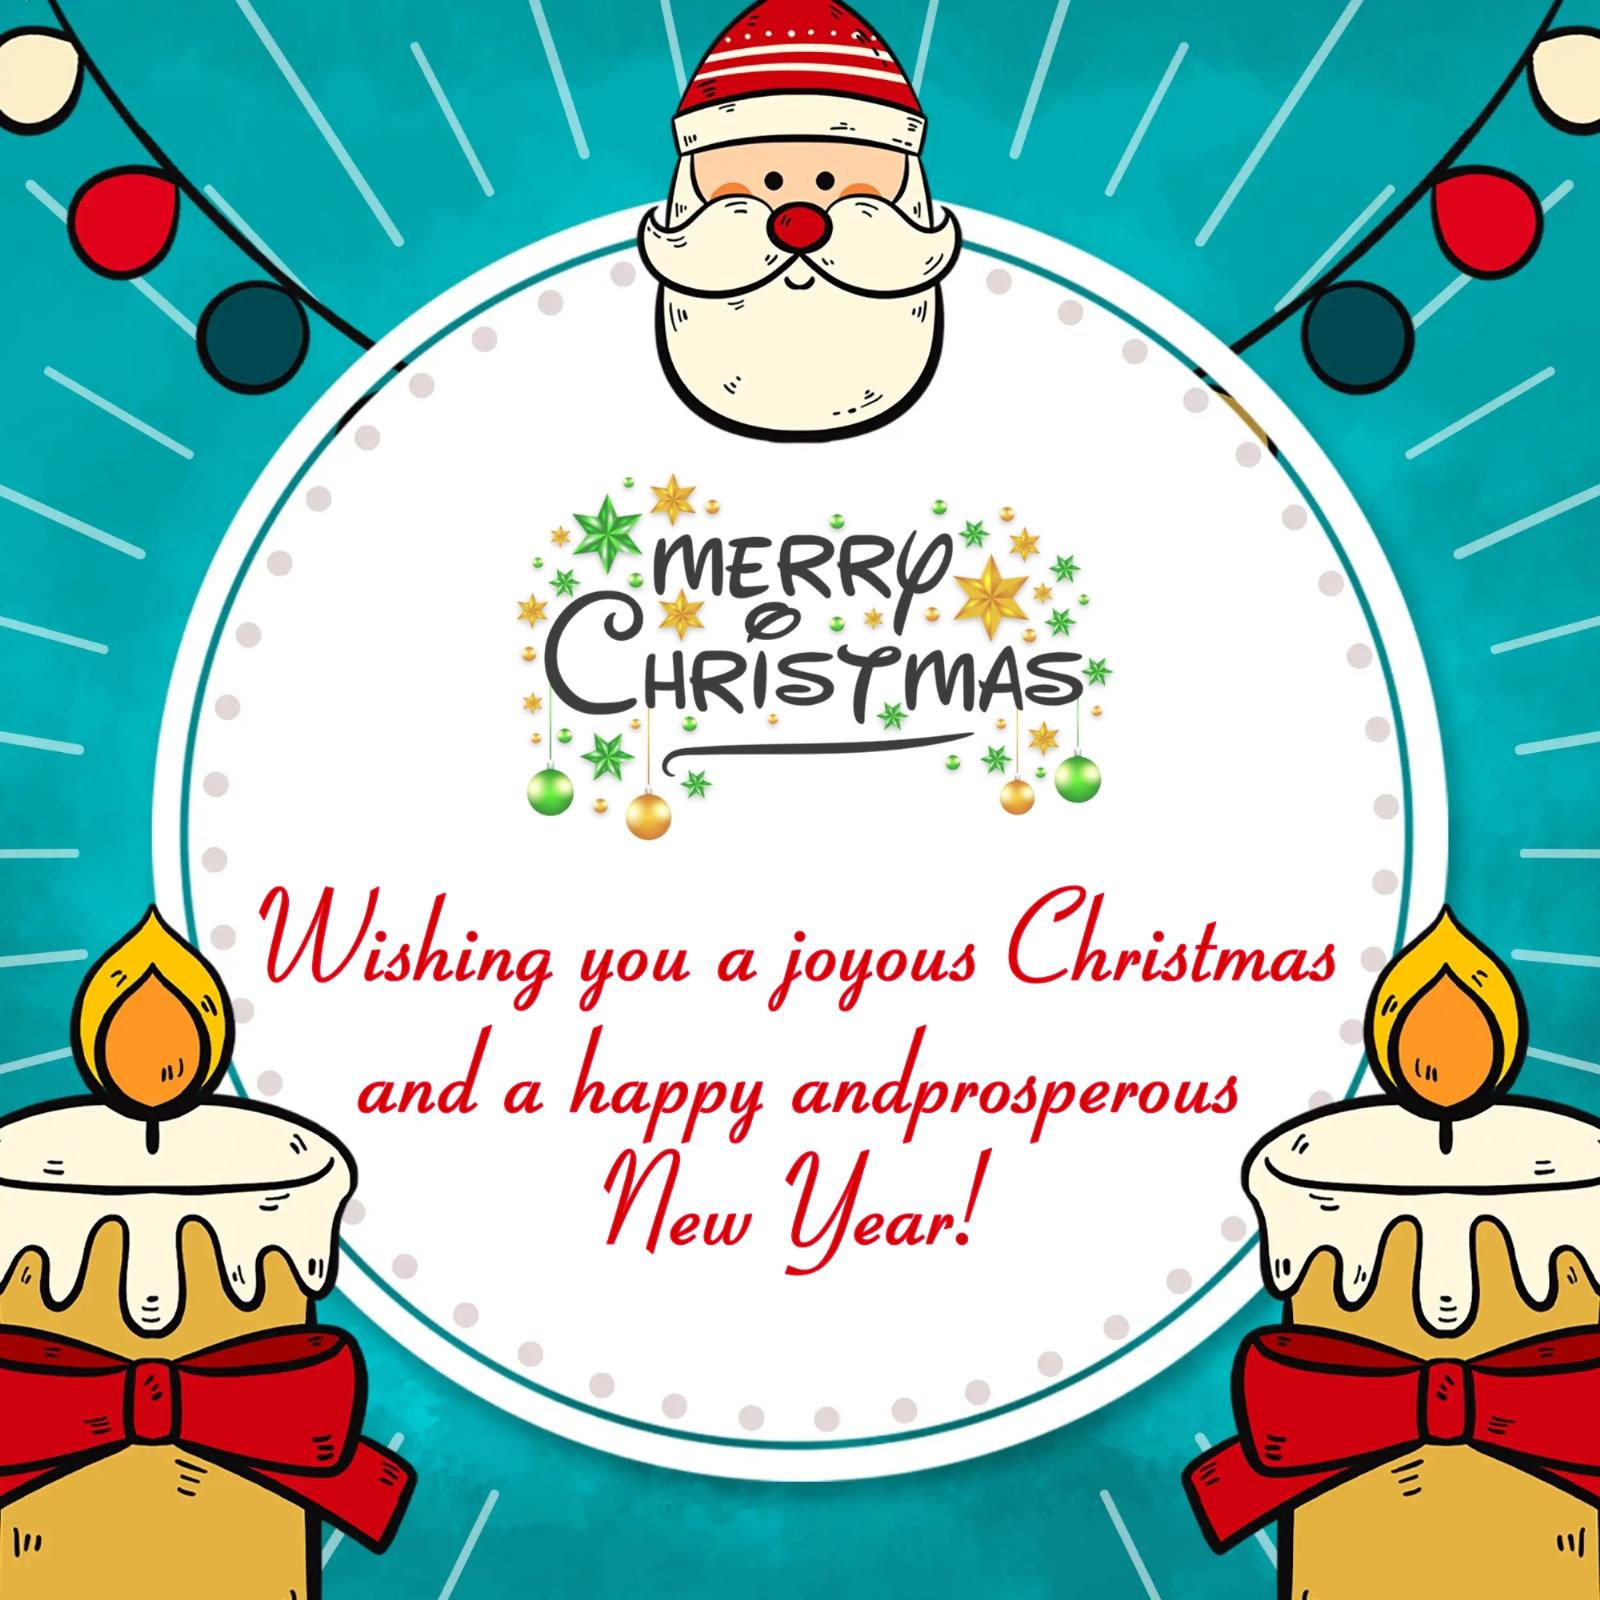 Wishing you a joyous Christmas and a happy and prosperous New Year